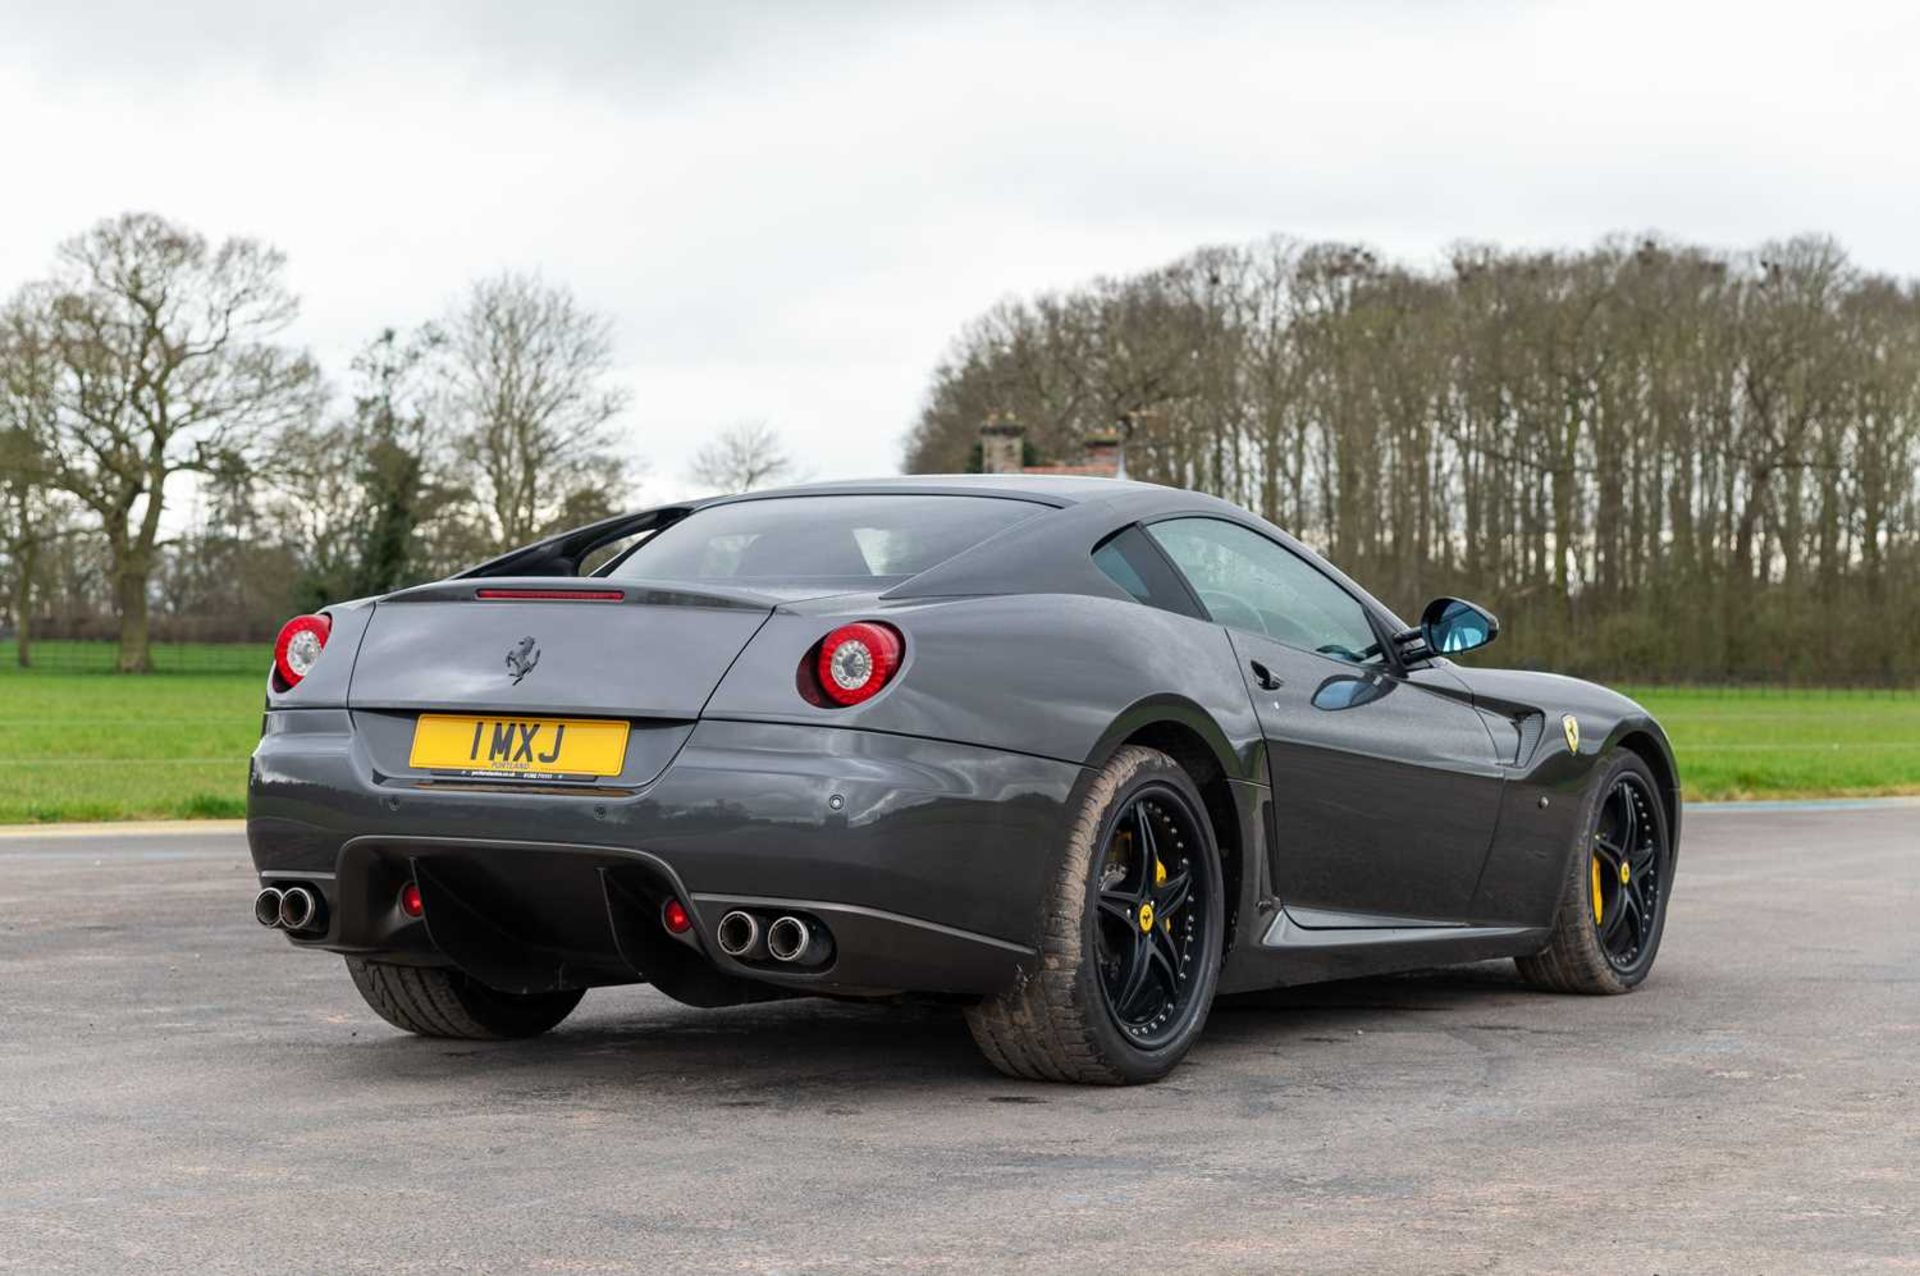 2008 Ferrari 599 GTB Fiorano Finished in Grigio over Nero with only 38,000 miles and full service hi - Image 14 of 85